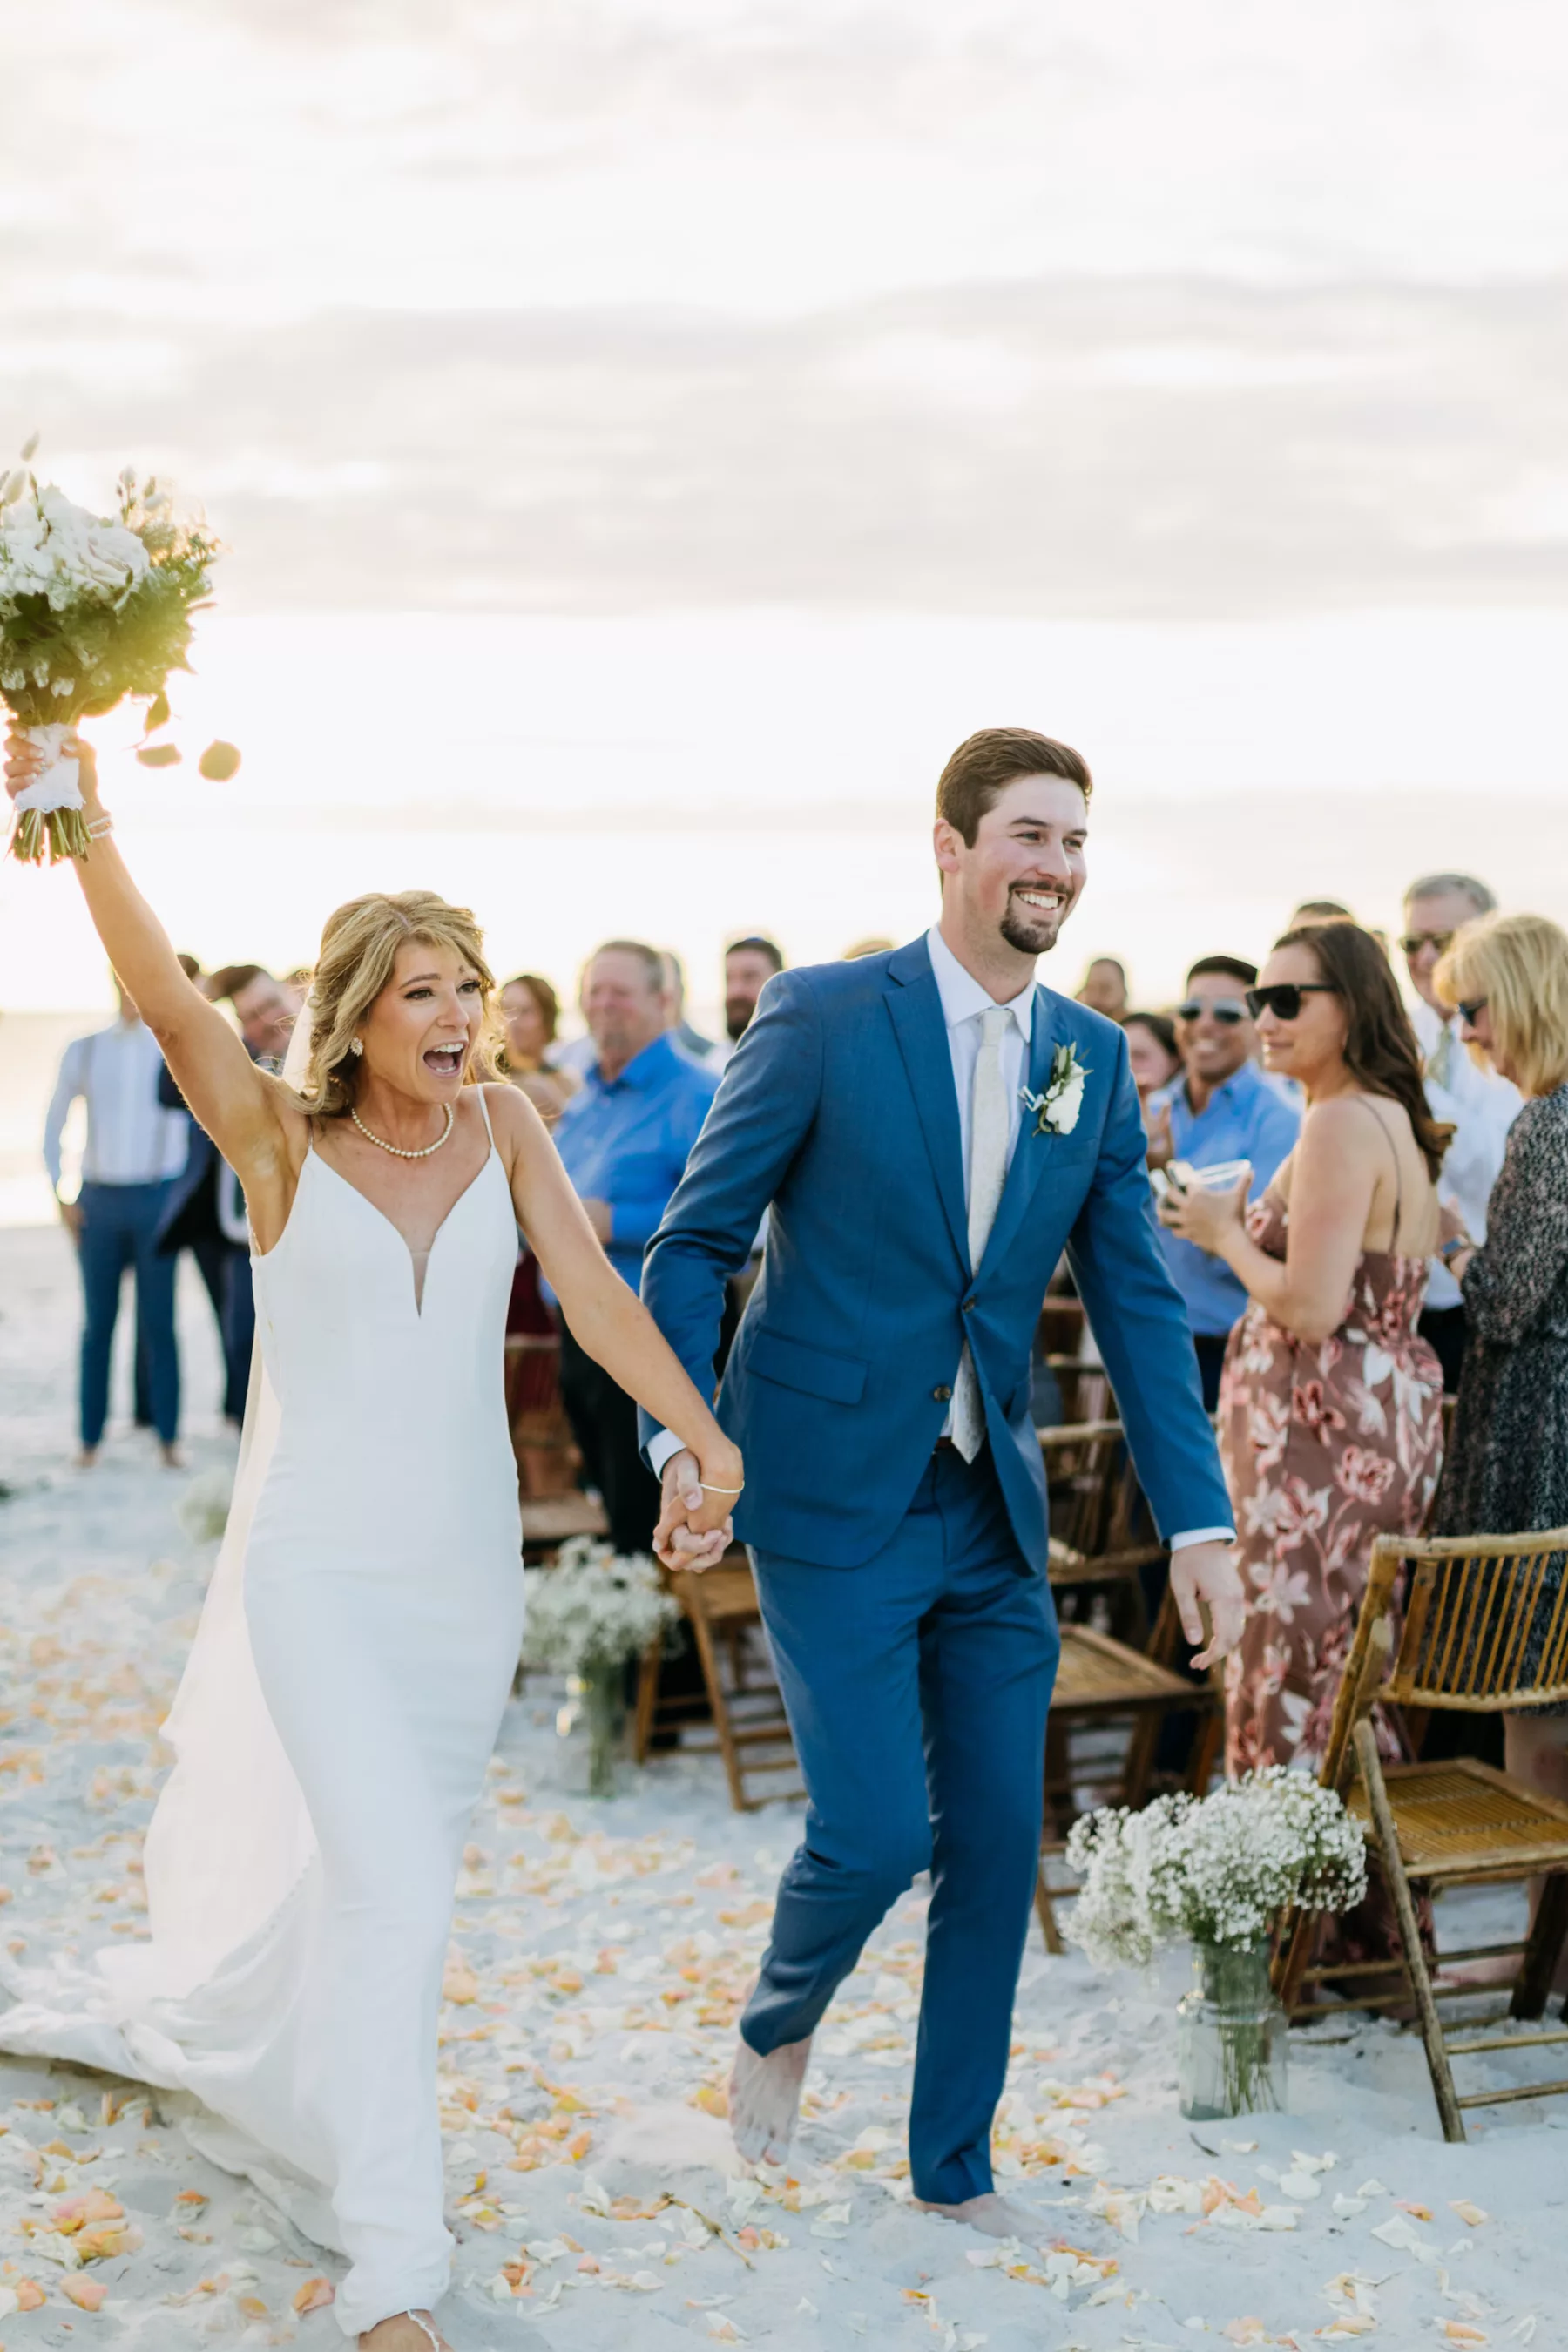 Bride and Groom Just Married Beach Wedding Portrait | Tampa Bay Videographer Priceless Studio Design